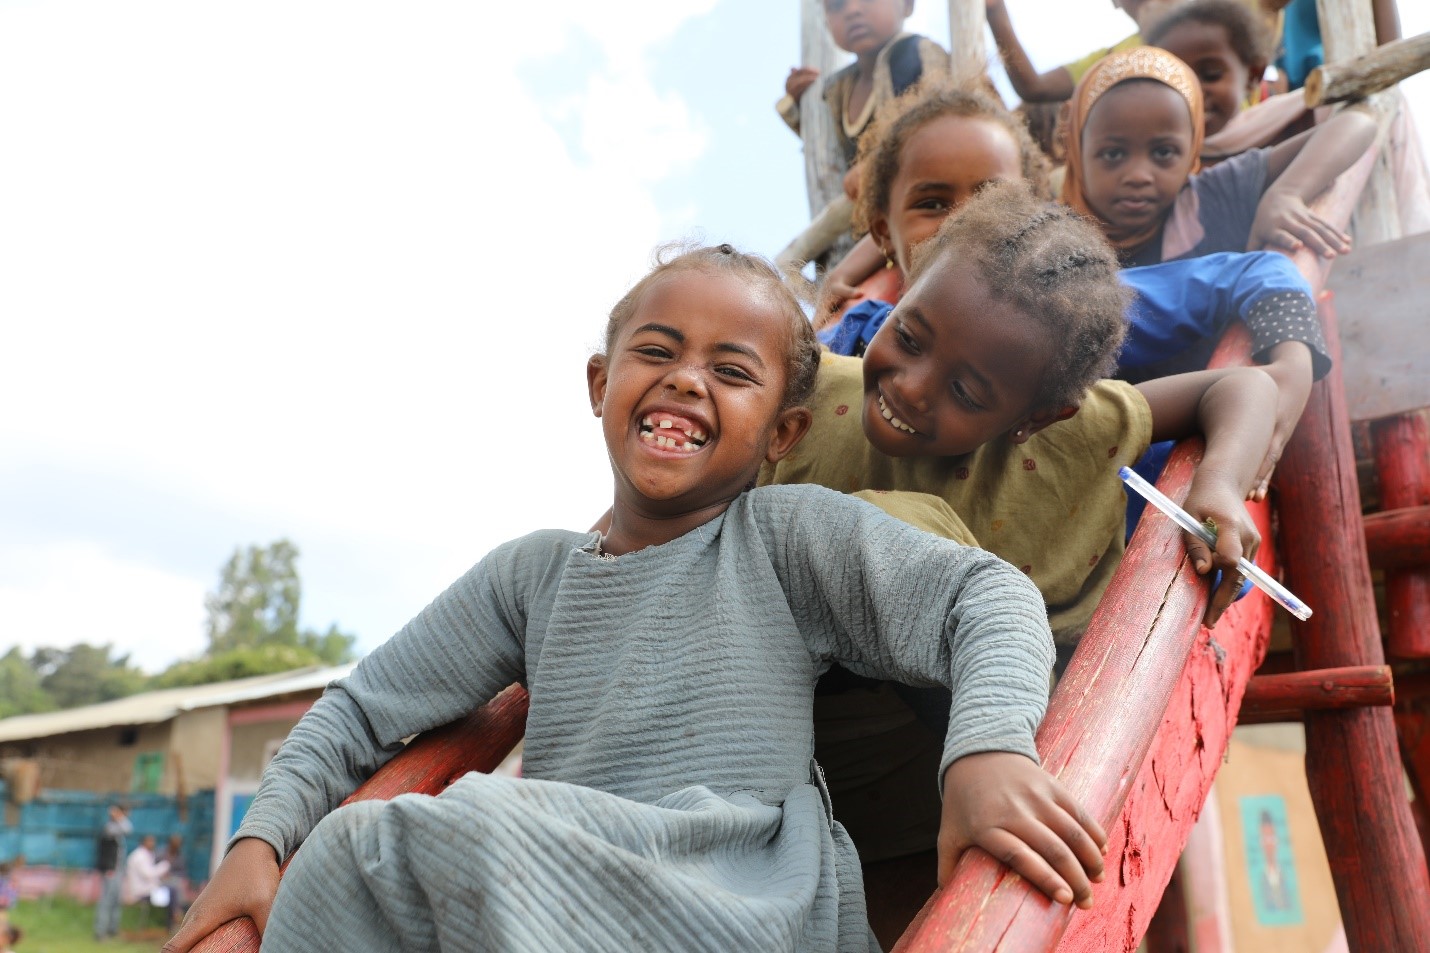 A group of children smile on a slide.